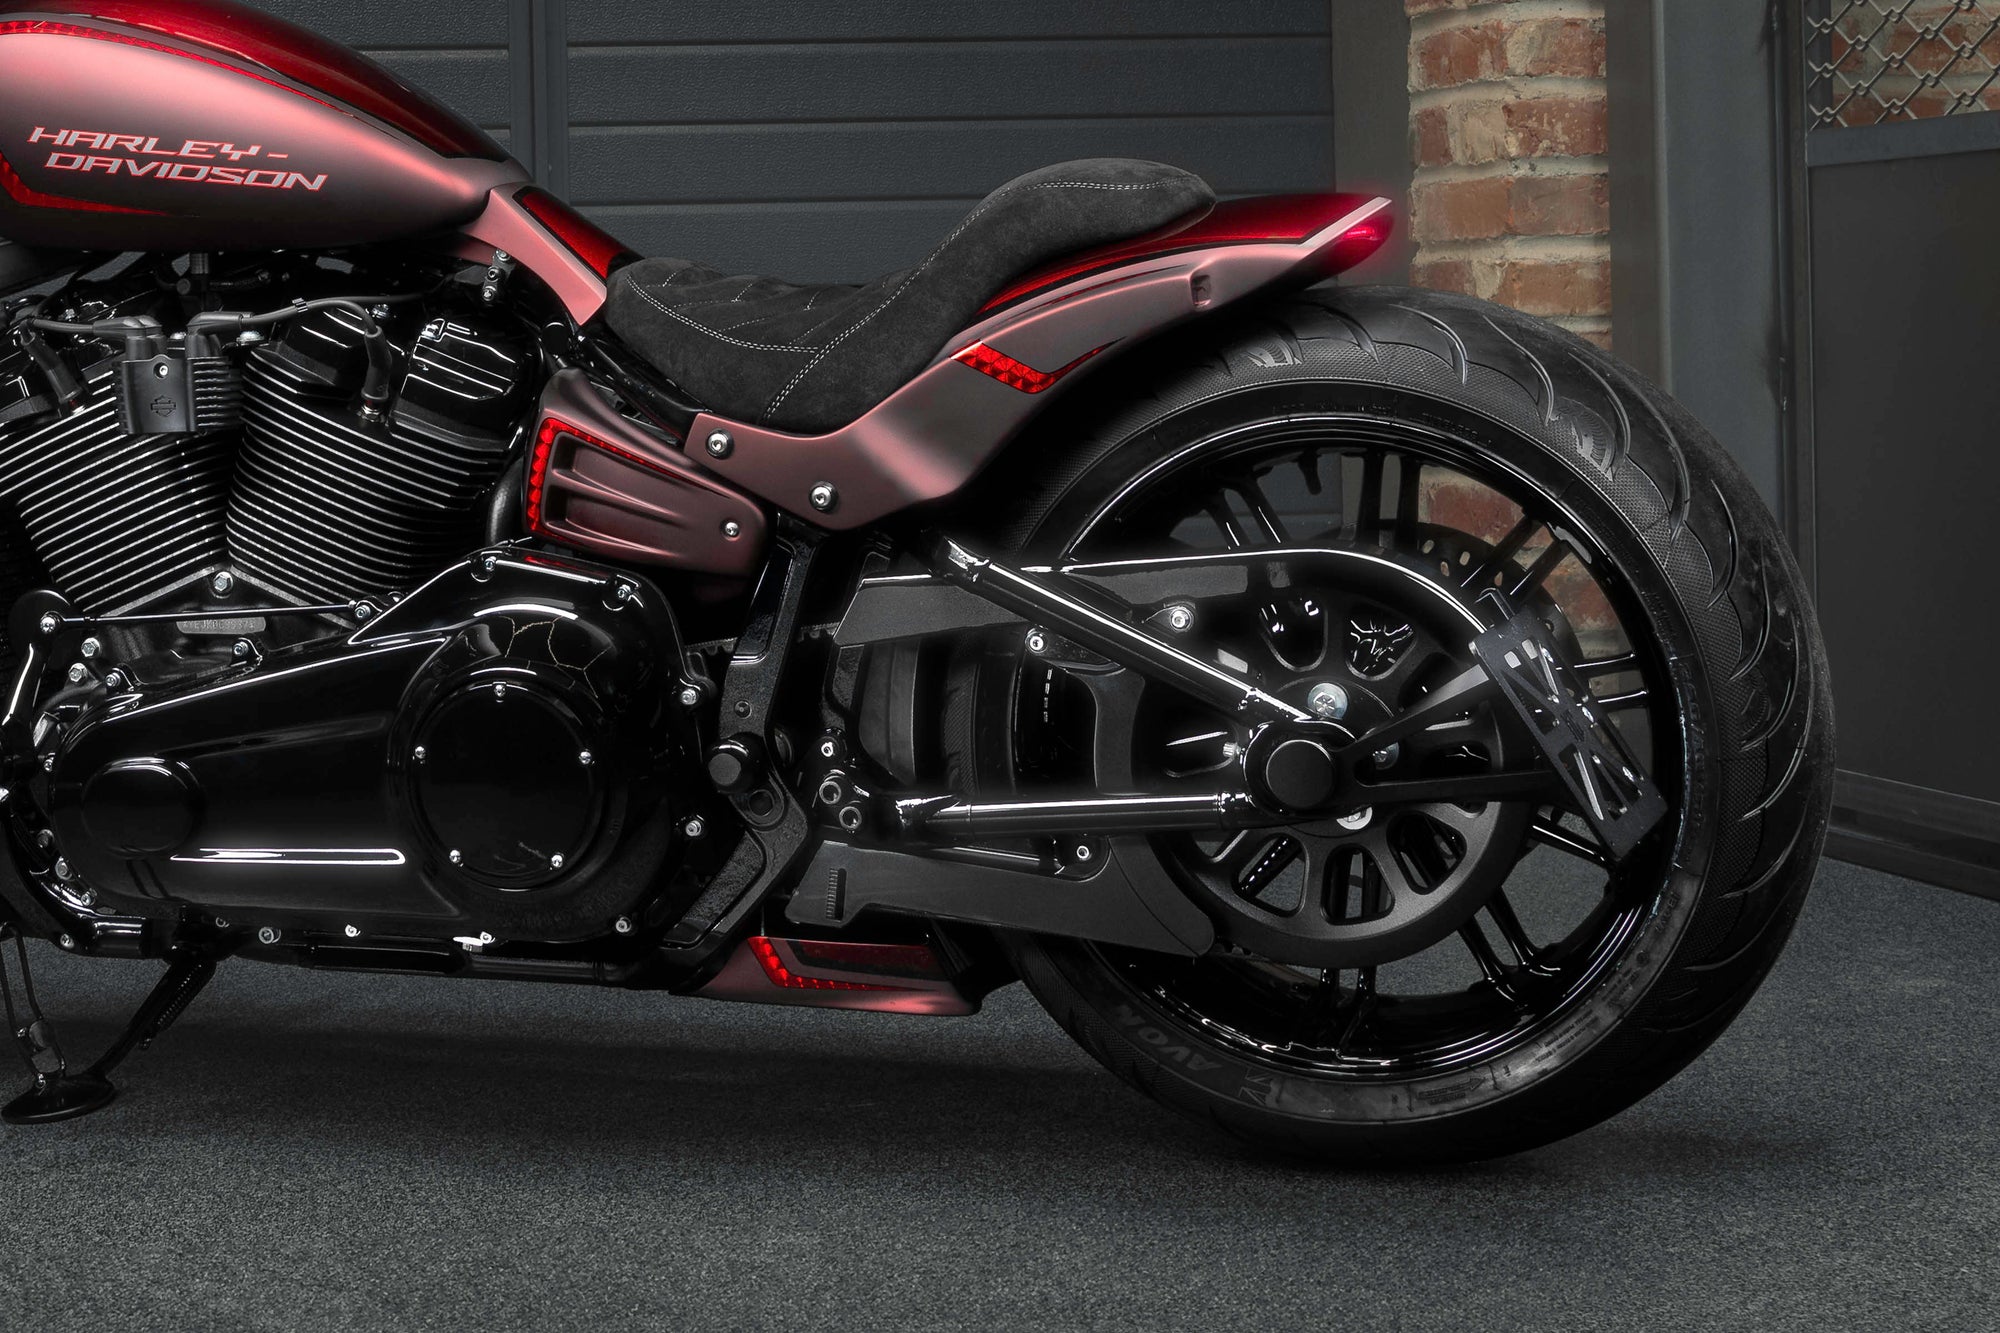 Zoomed Harley Davidson Breakout motorcycle with Killer Custom parts from the side in the garage